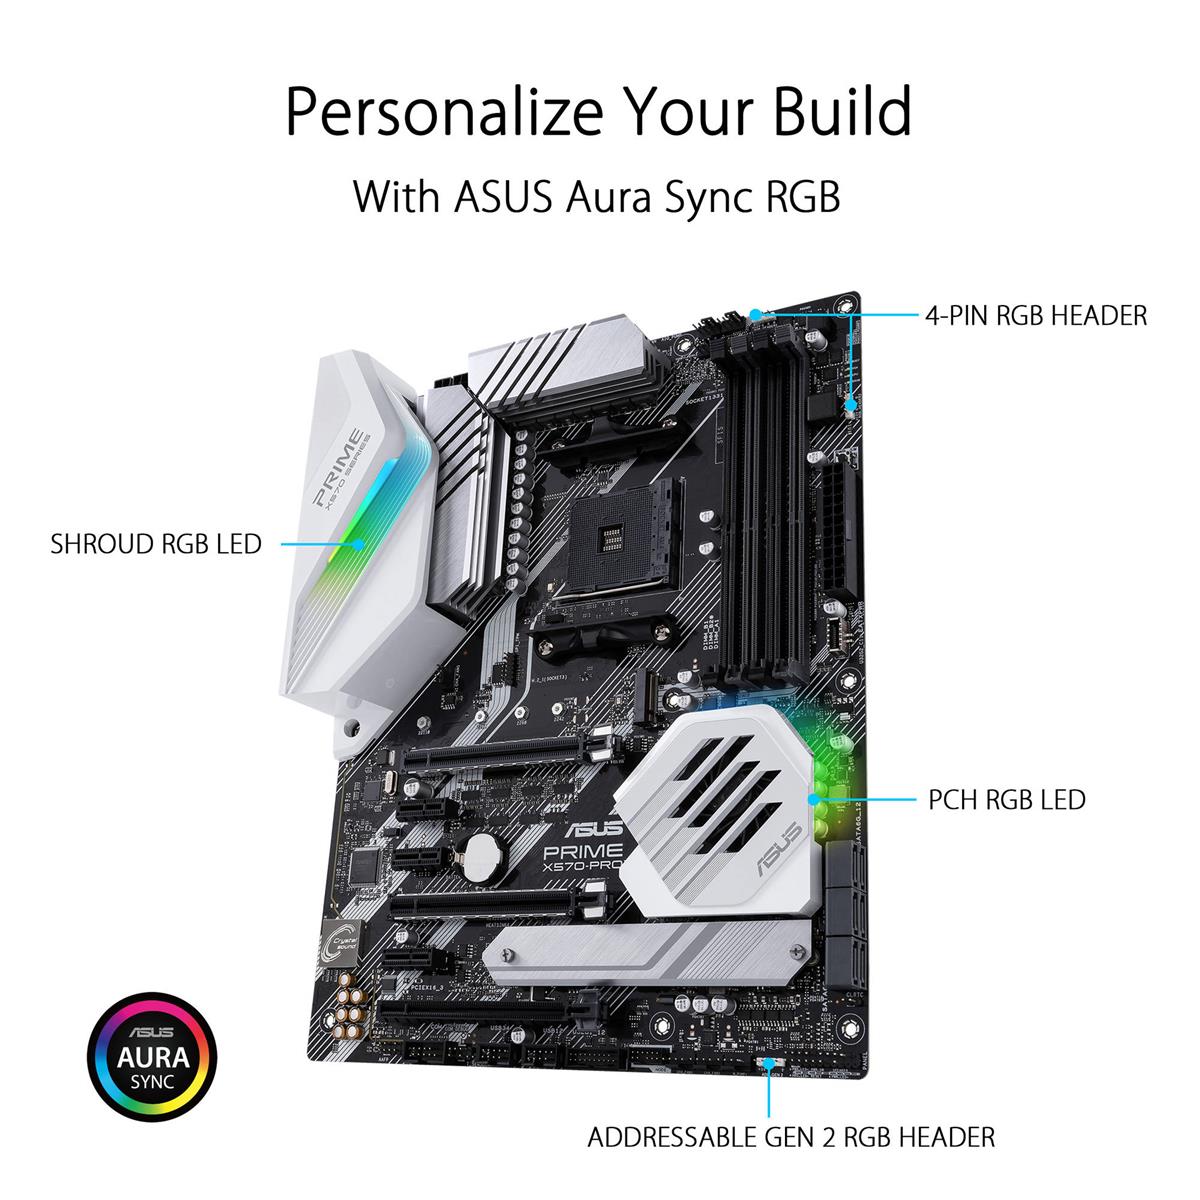 Image of ASUS Asus Prime X570-PRO AMD AM4 ATX Motherboard with PCIe 4.0